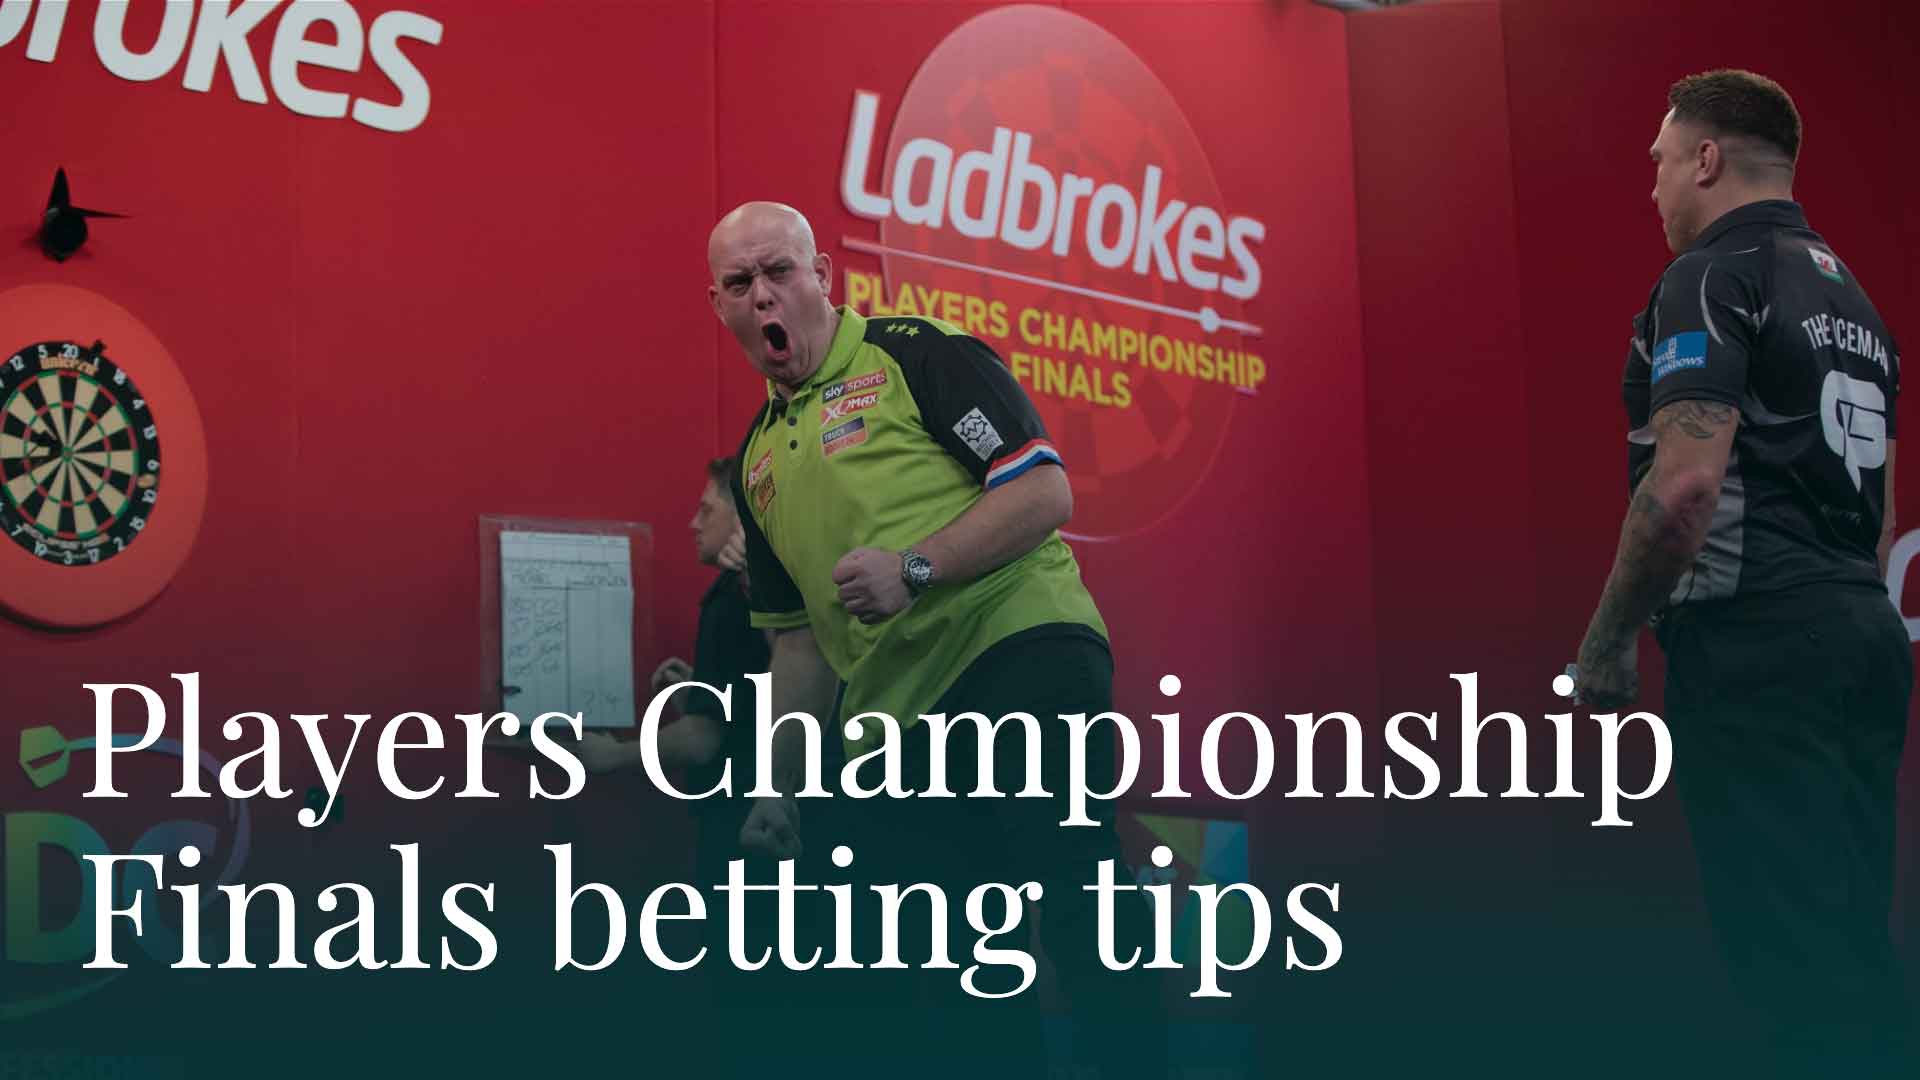 Players Championship Finals Free darts betting tips, preview and predictions for the ITV4 major in Coventry